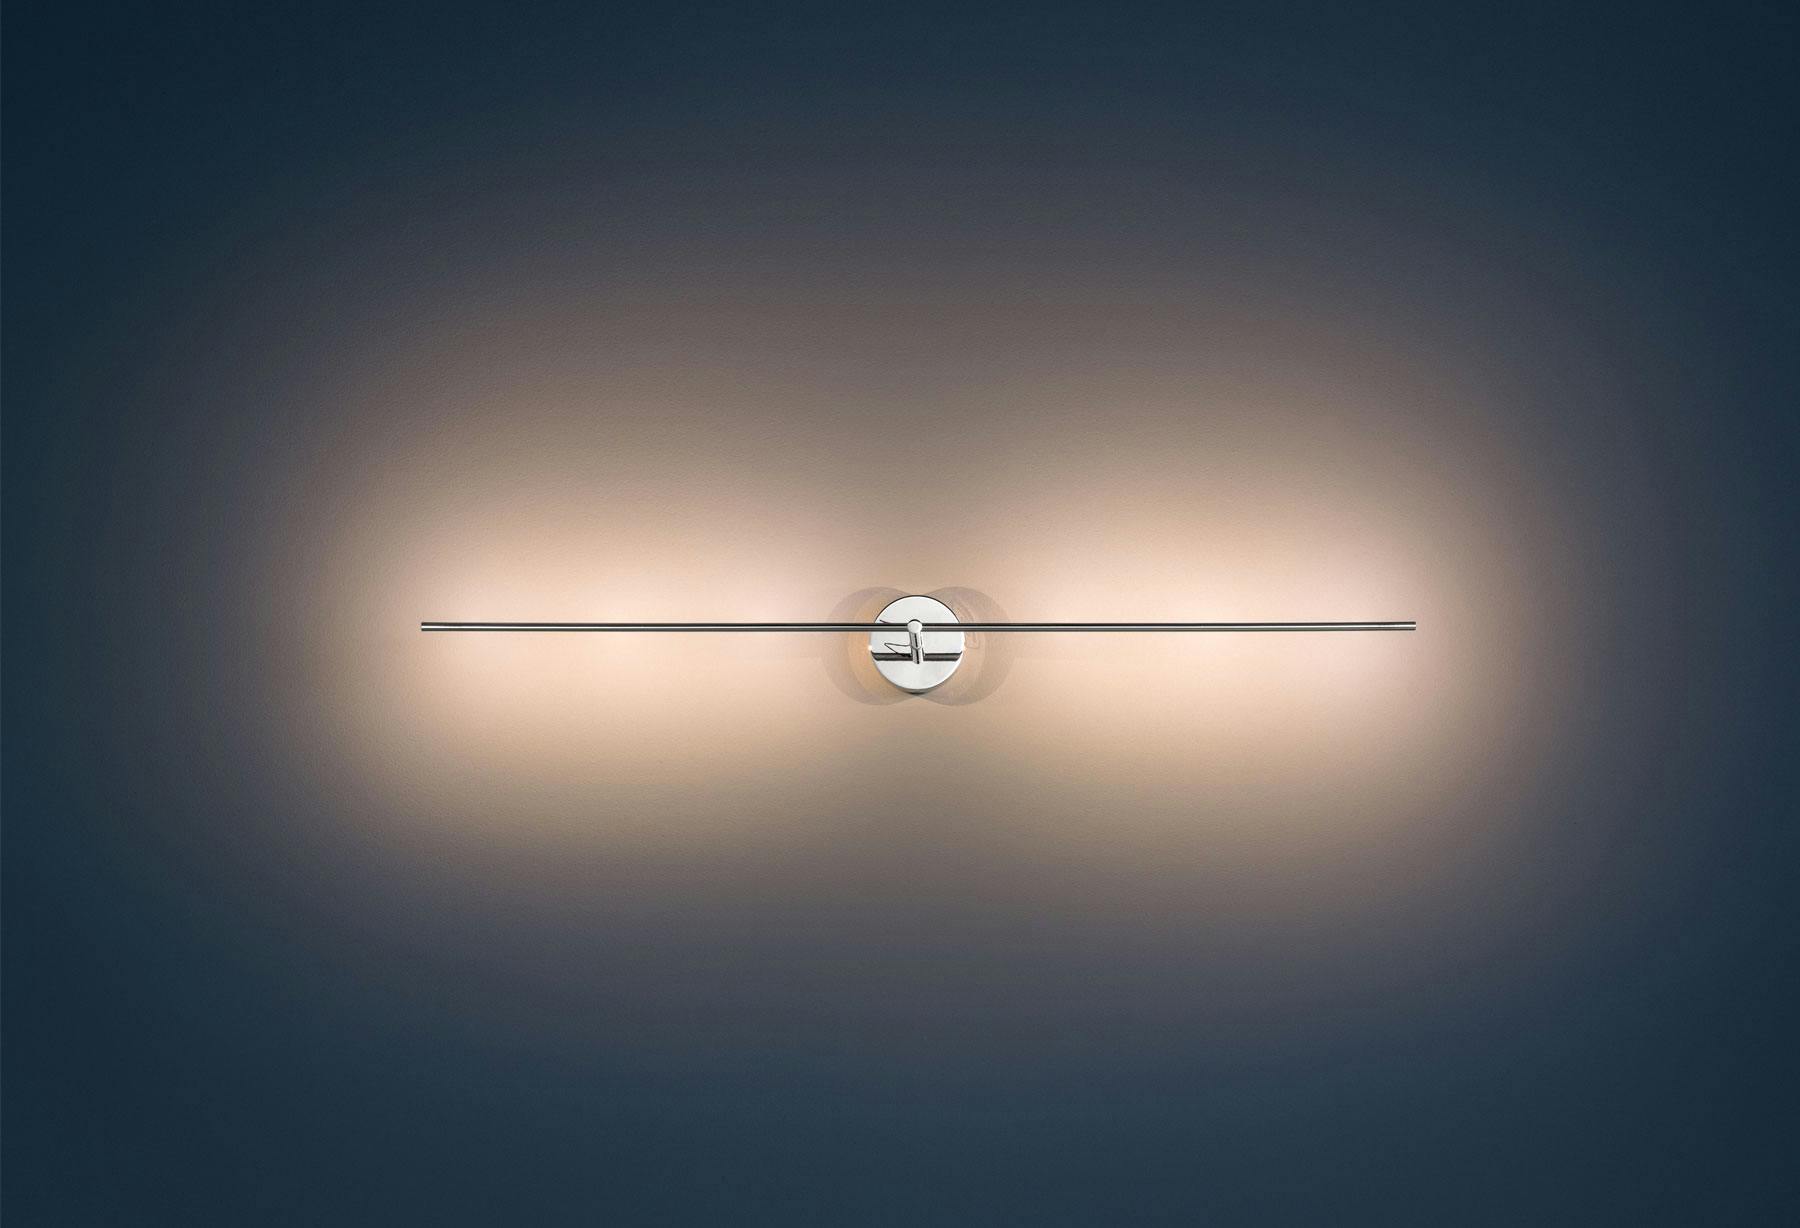 <p>The “Light Stick” lamp receives an Honourable Mention at the ADI Compasso d’Oro 2011.</p>
